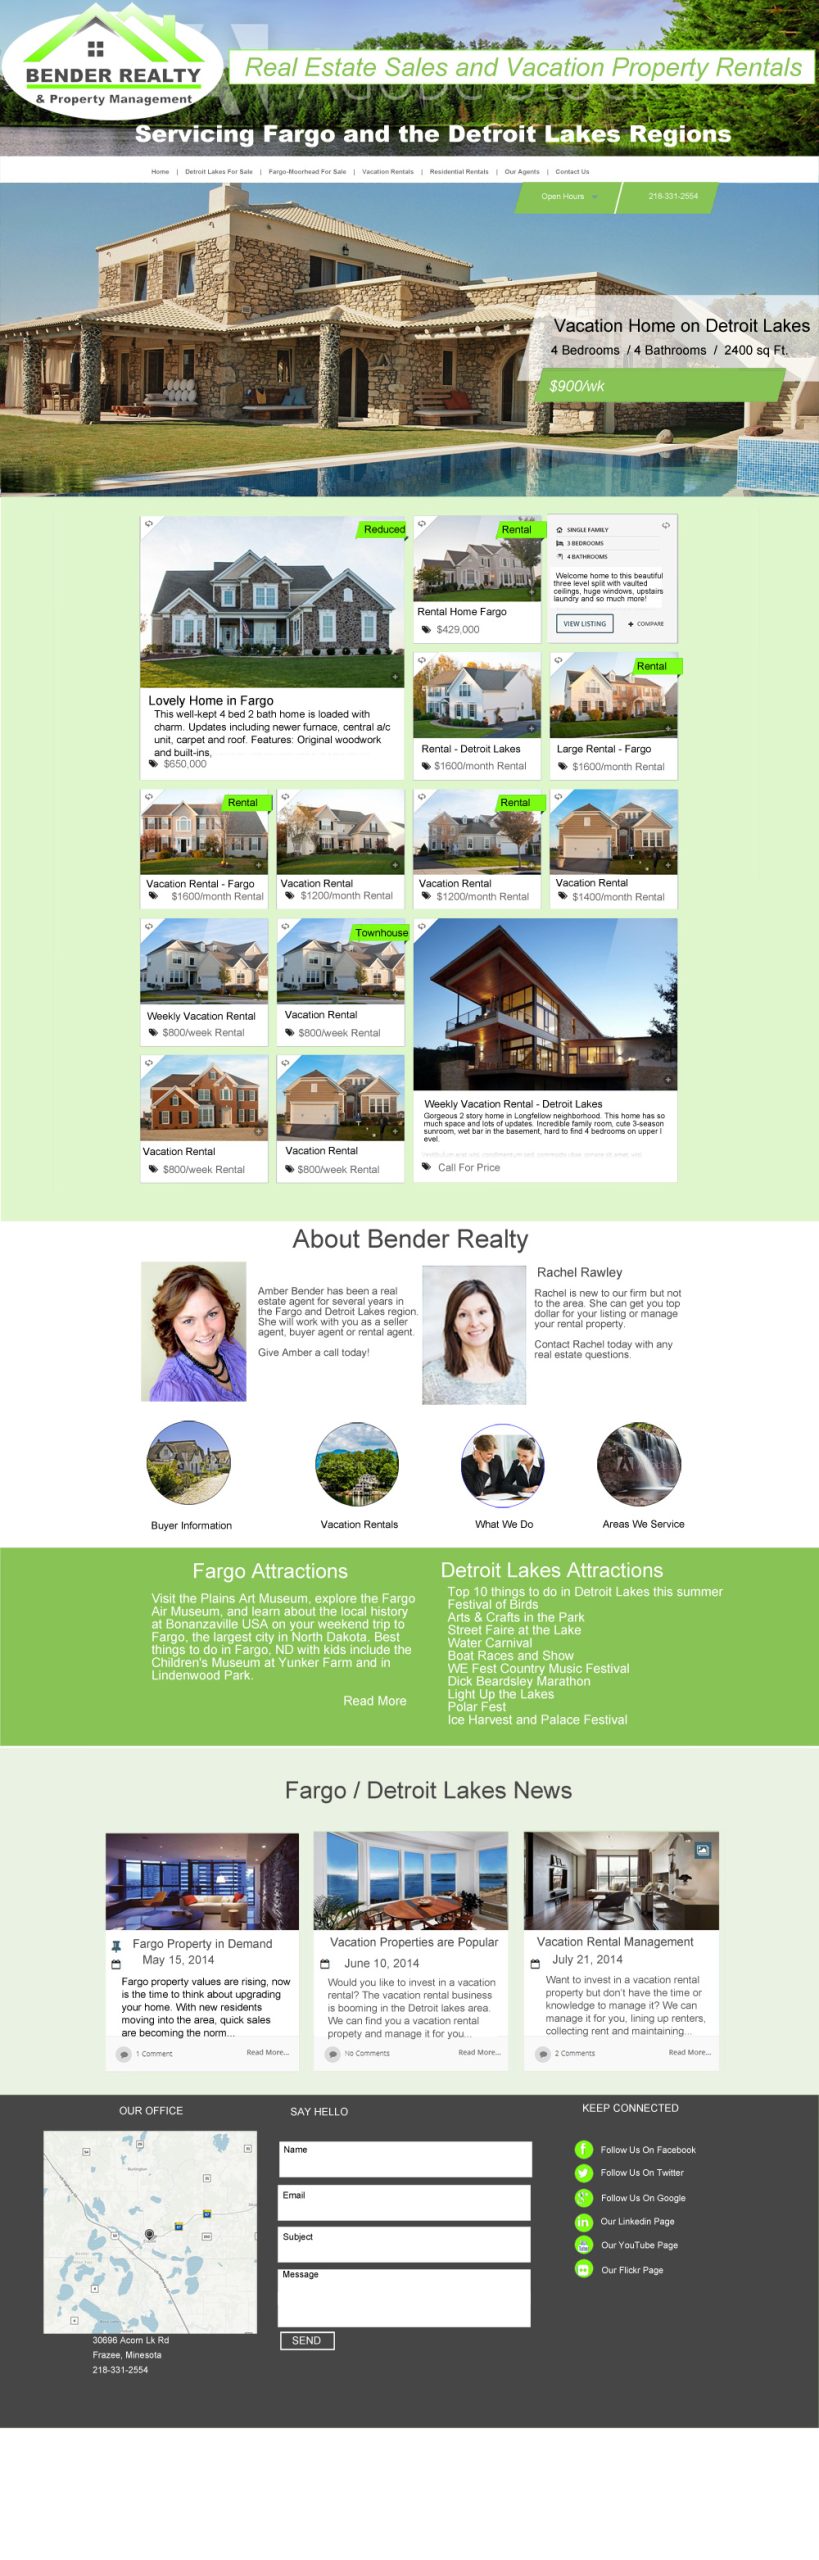 image of bender realty site